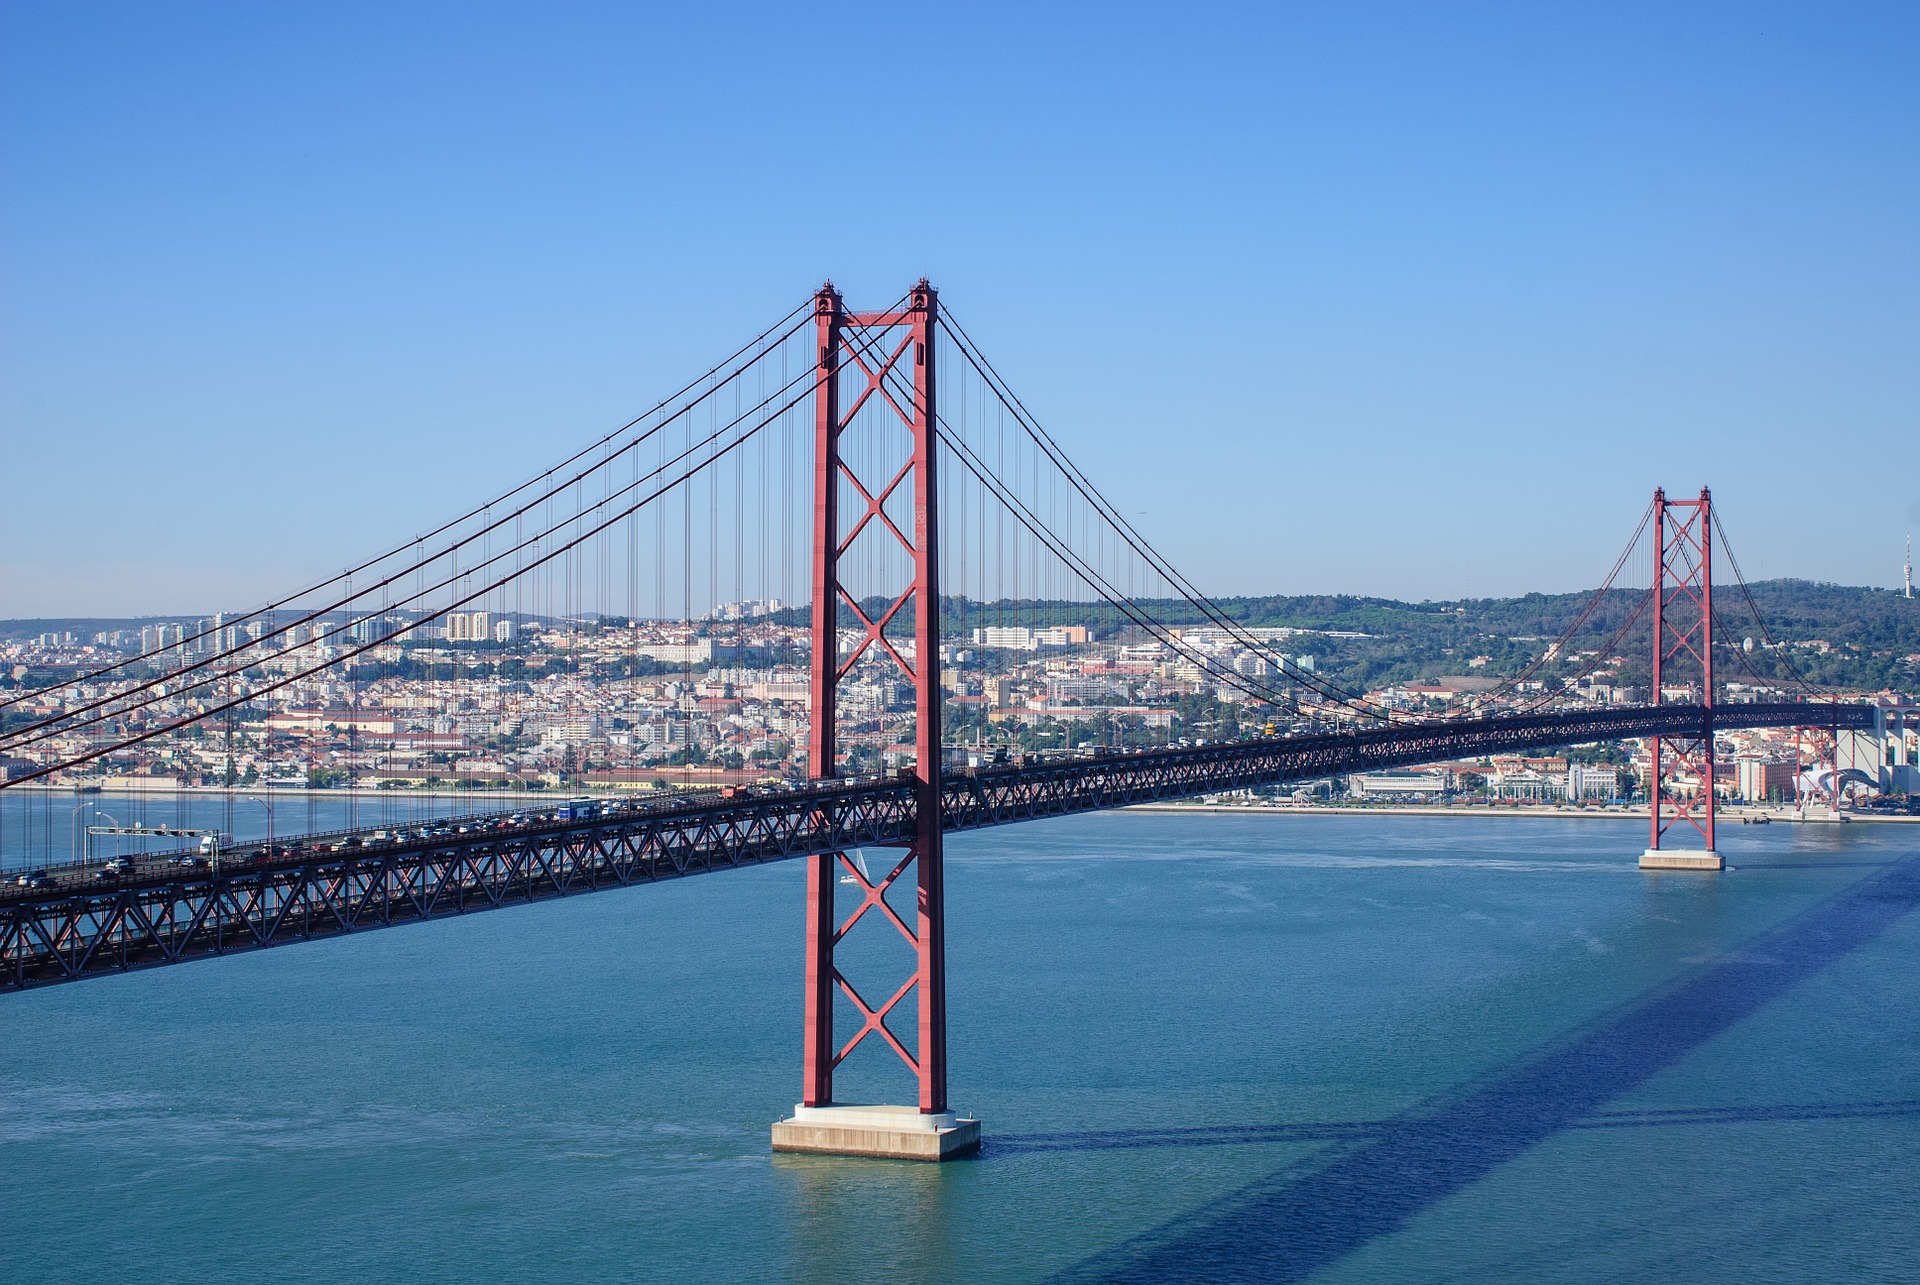 Spanish newspaper abc gives you 10 reasons to visit Lisbon